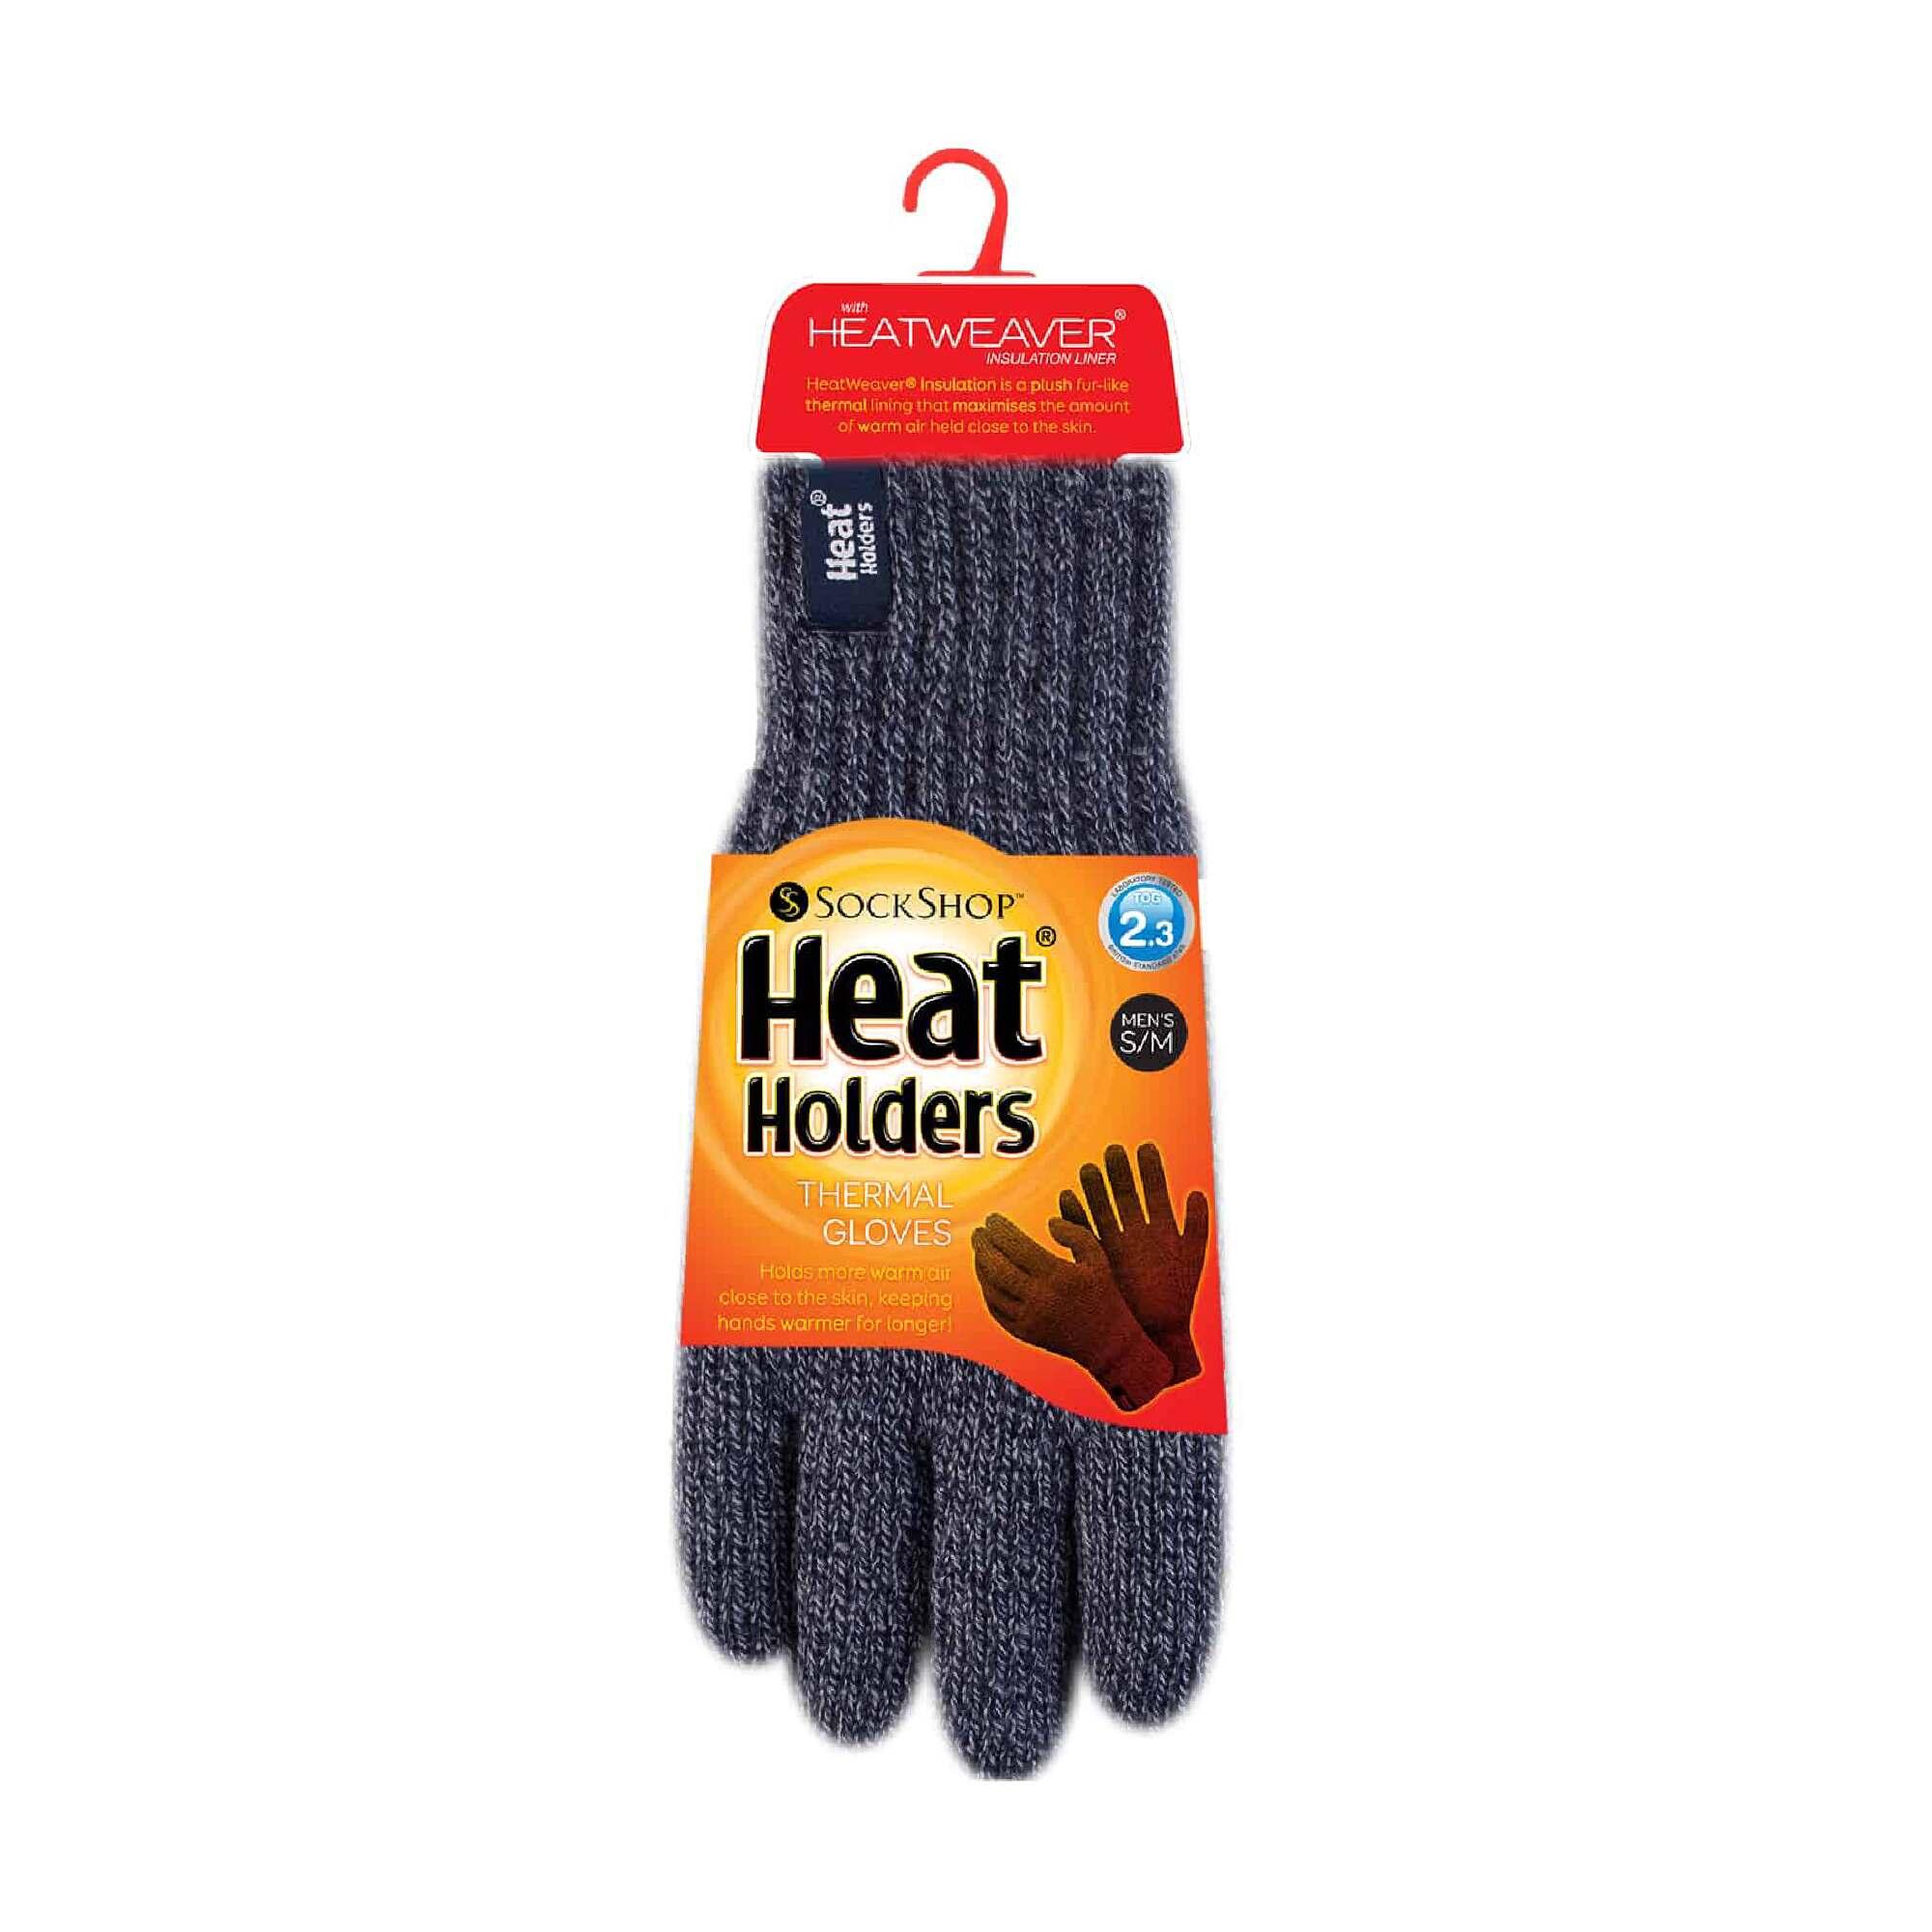 Mens Winter Warm Fleece Lined Thermal Gloves with Heatweaver Lining 2/4